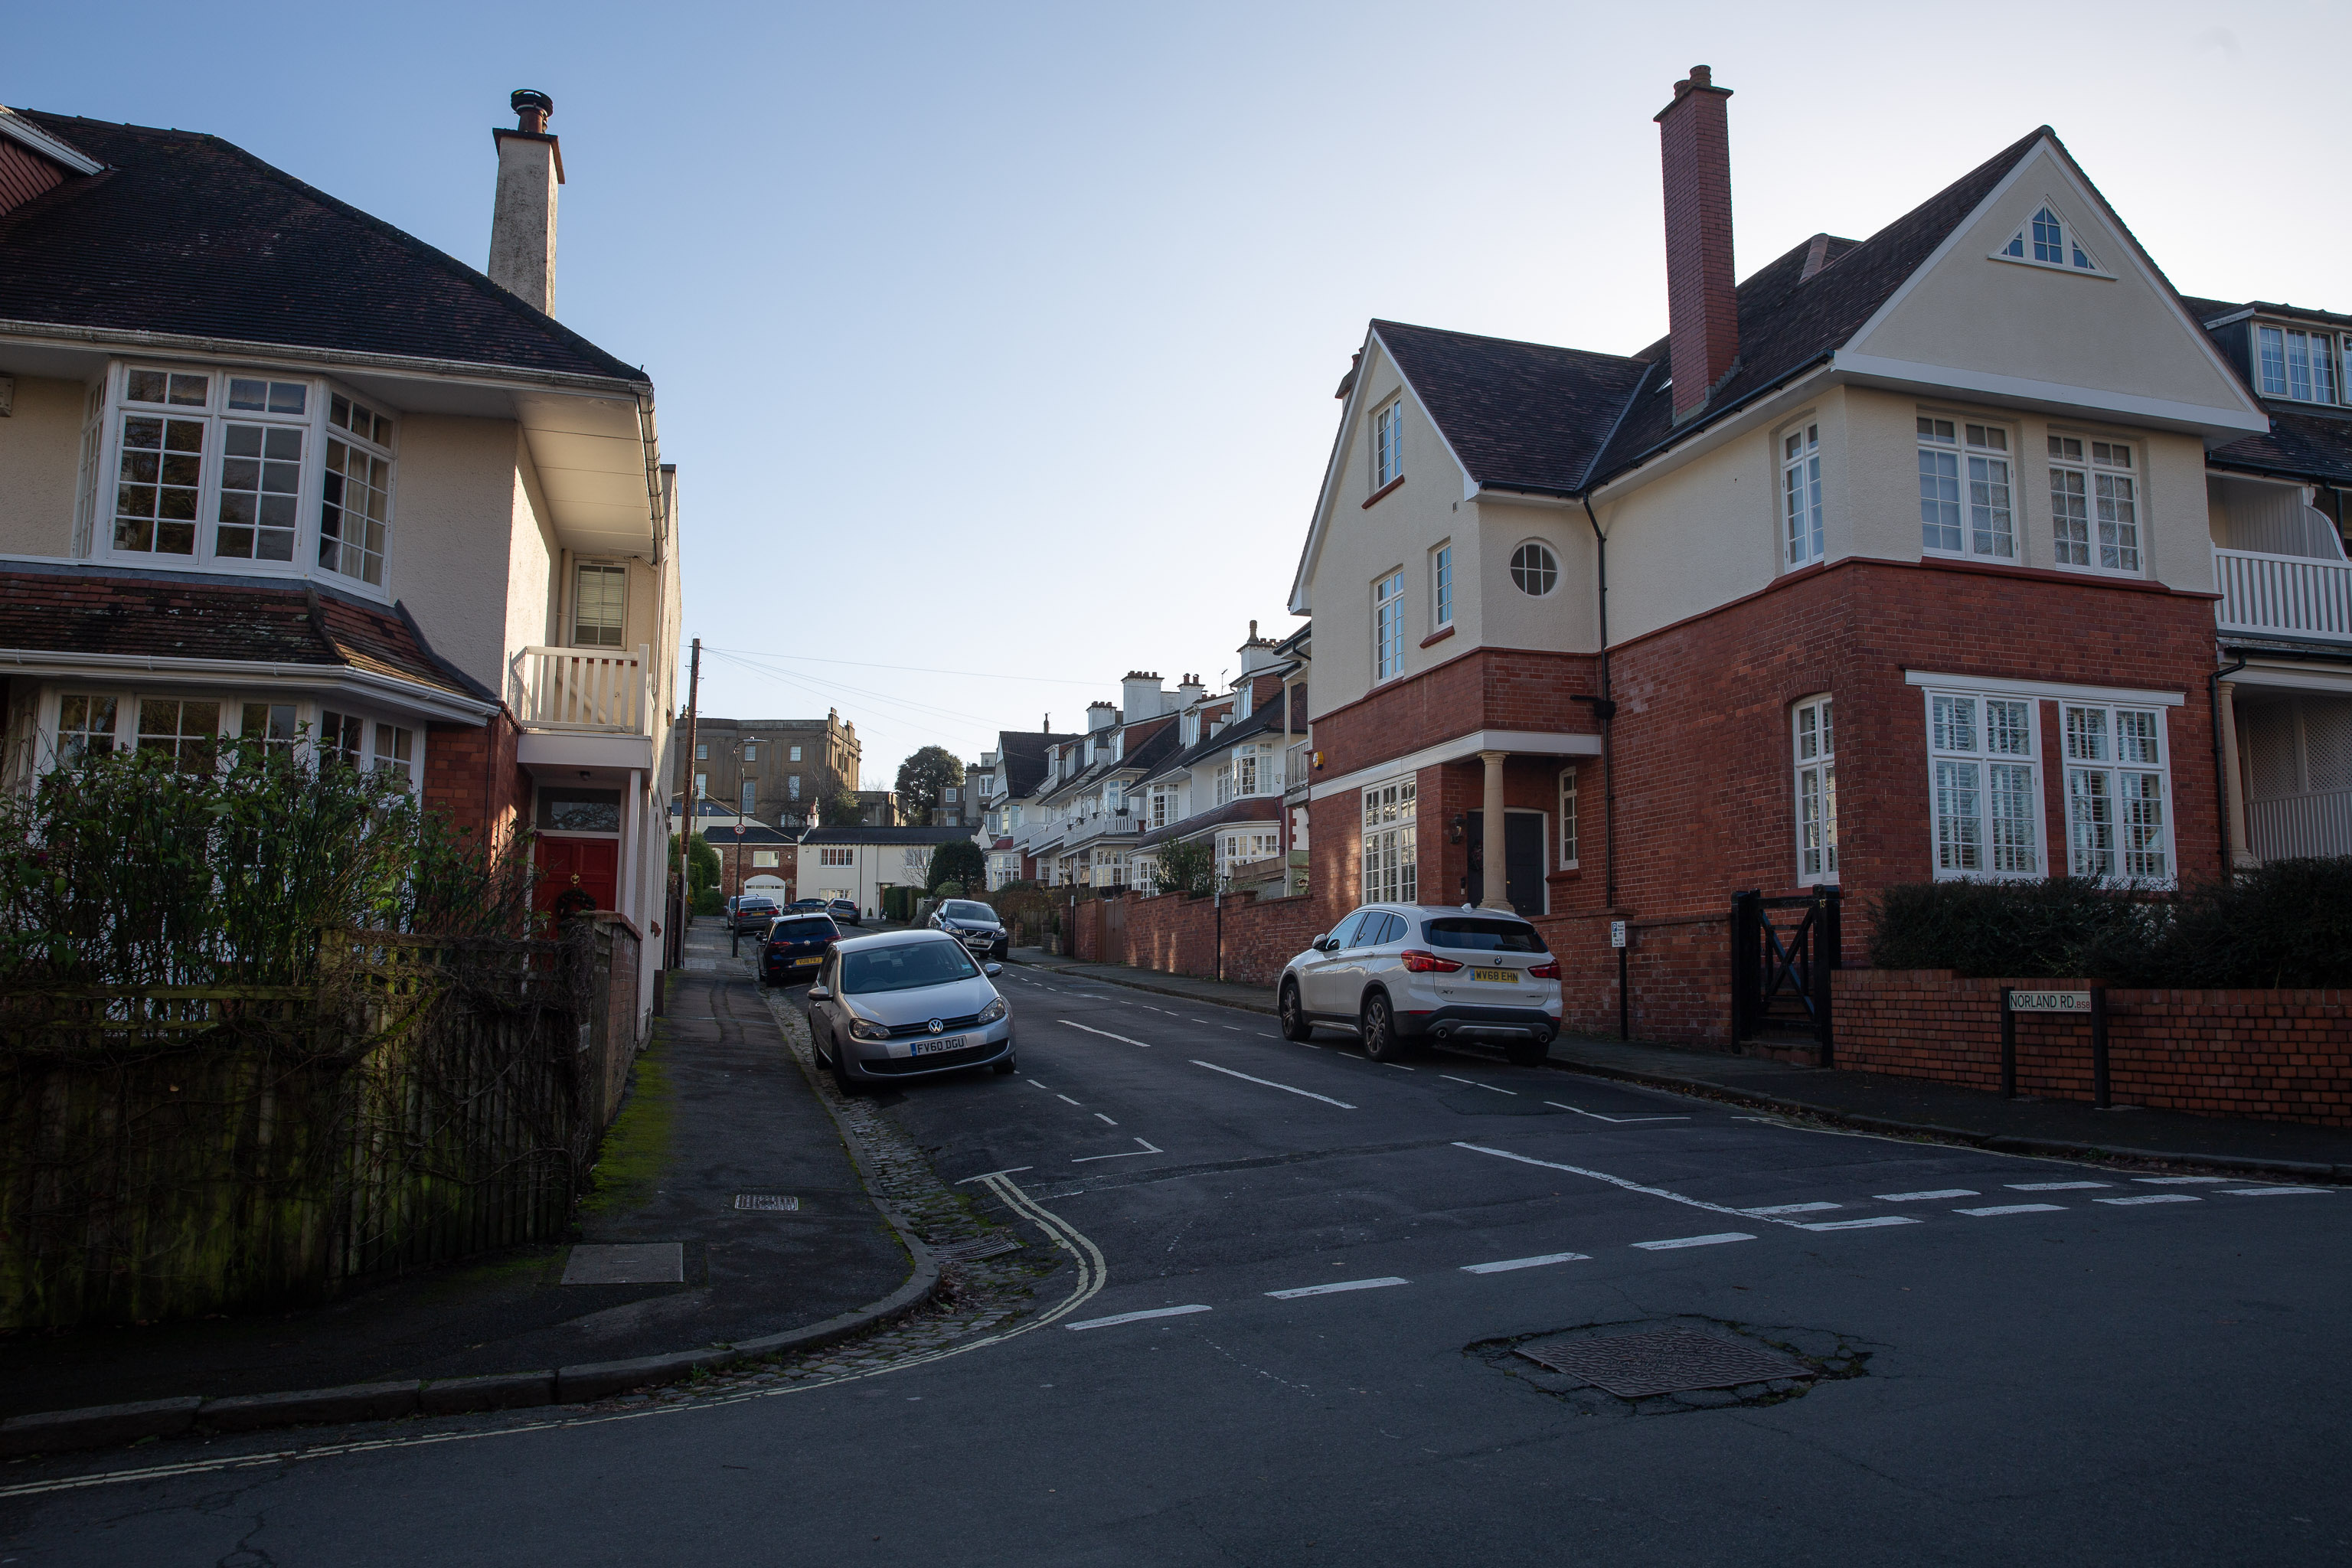 Norland Road
There's a reason that the architecture in this area is such a mishmash. Here's an excerpt from a description of the Bristol Blitz, which happened o...